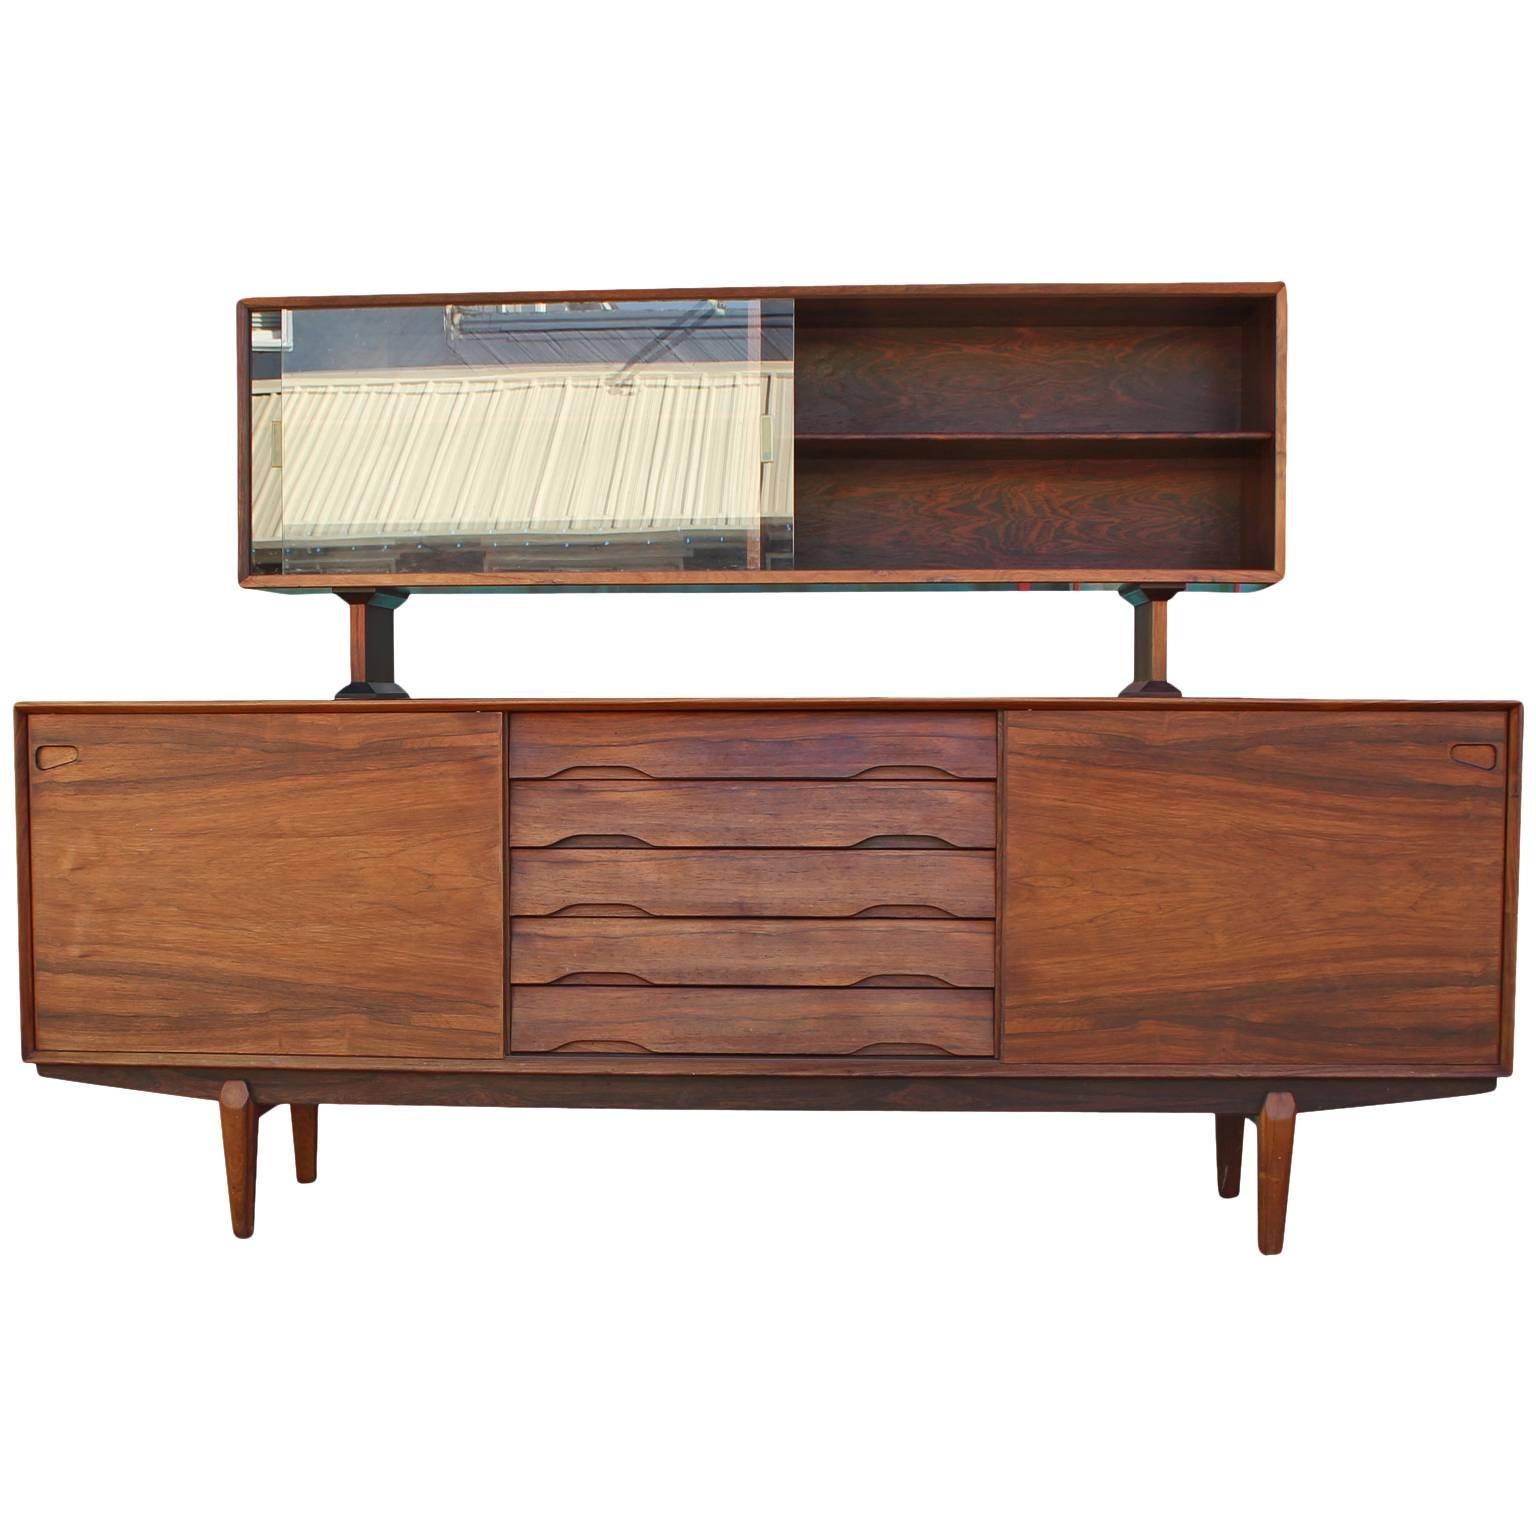 Excellent Skovby Rosewood Credenza and Hutch